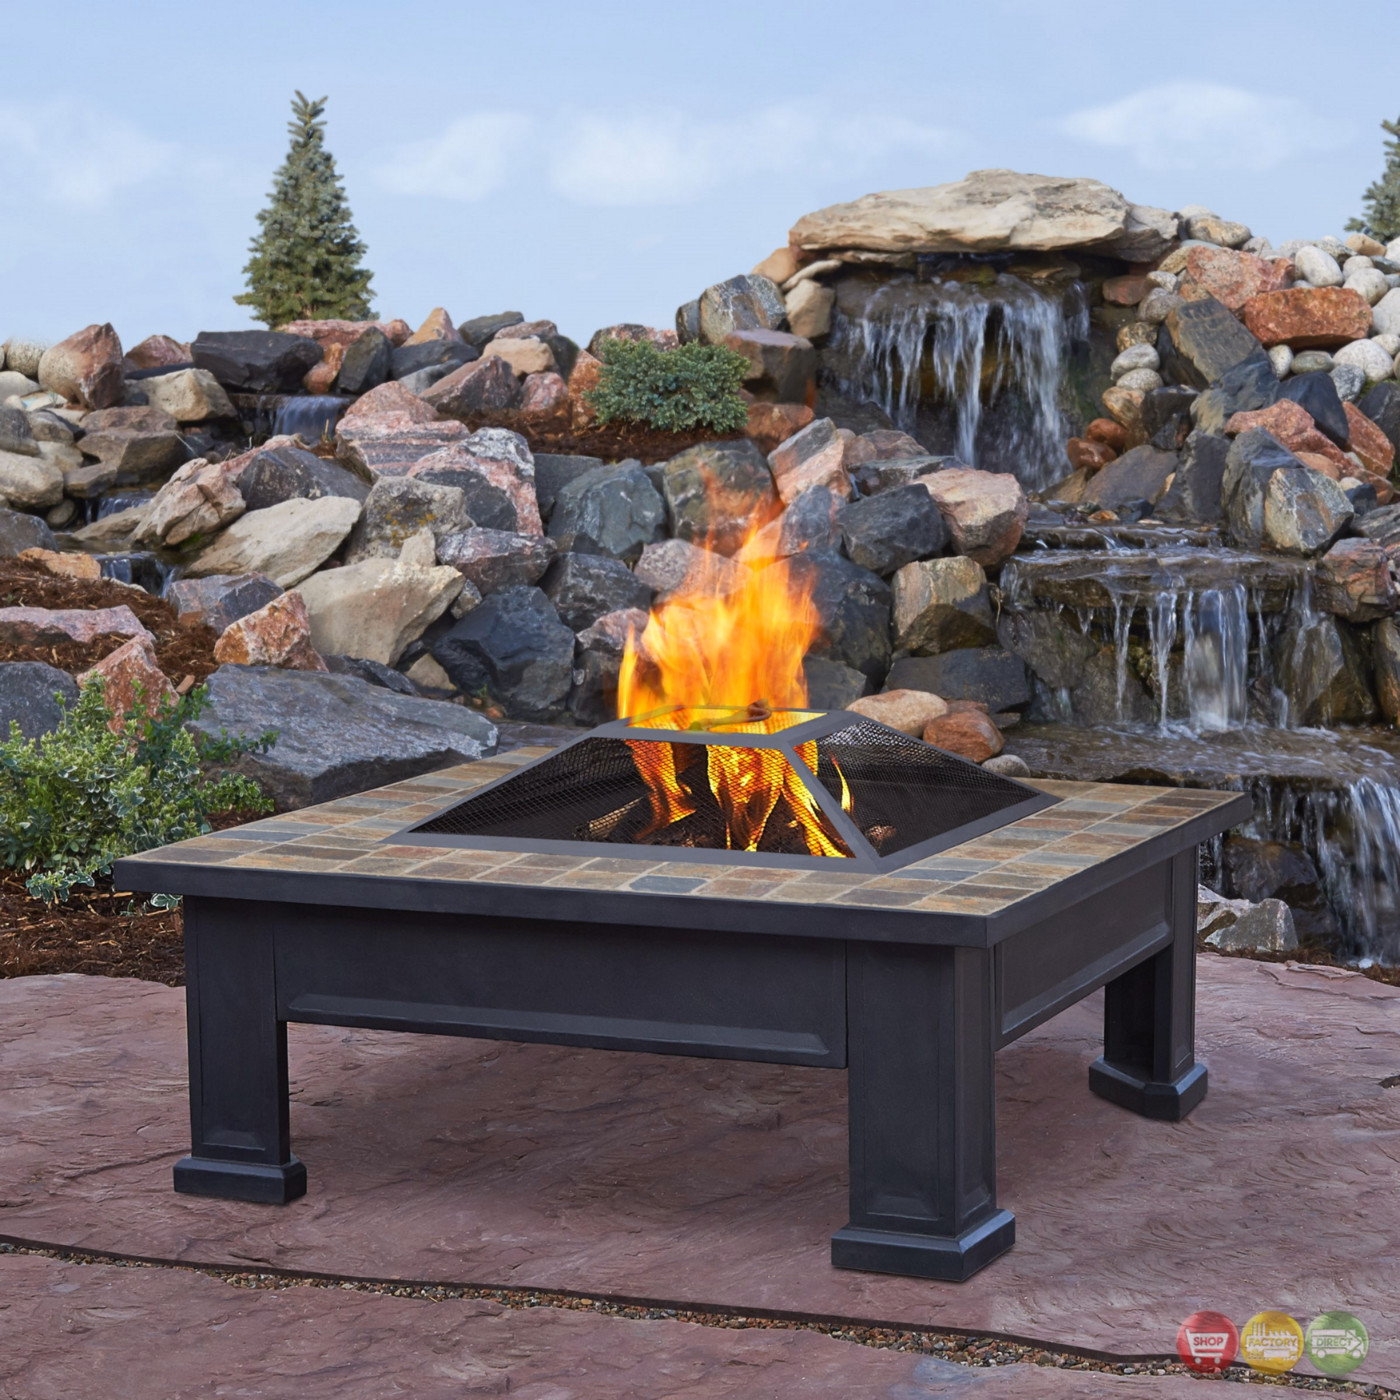 Patio Wood Fire Pit
 Breckenridge Outdoor Wood burning 34" Square Fire Pit With